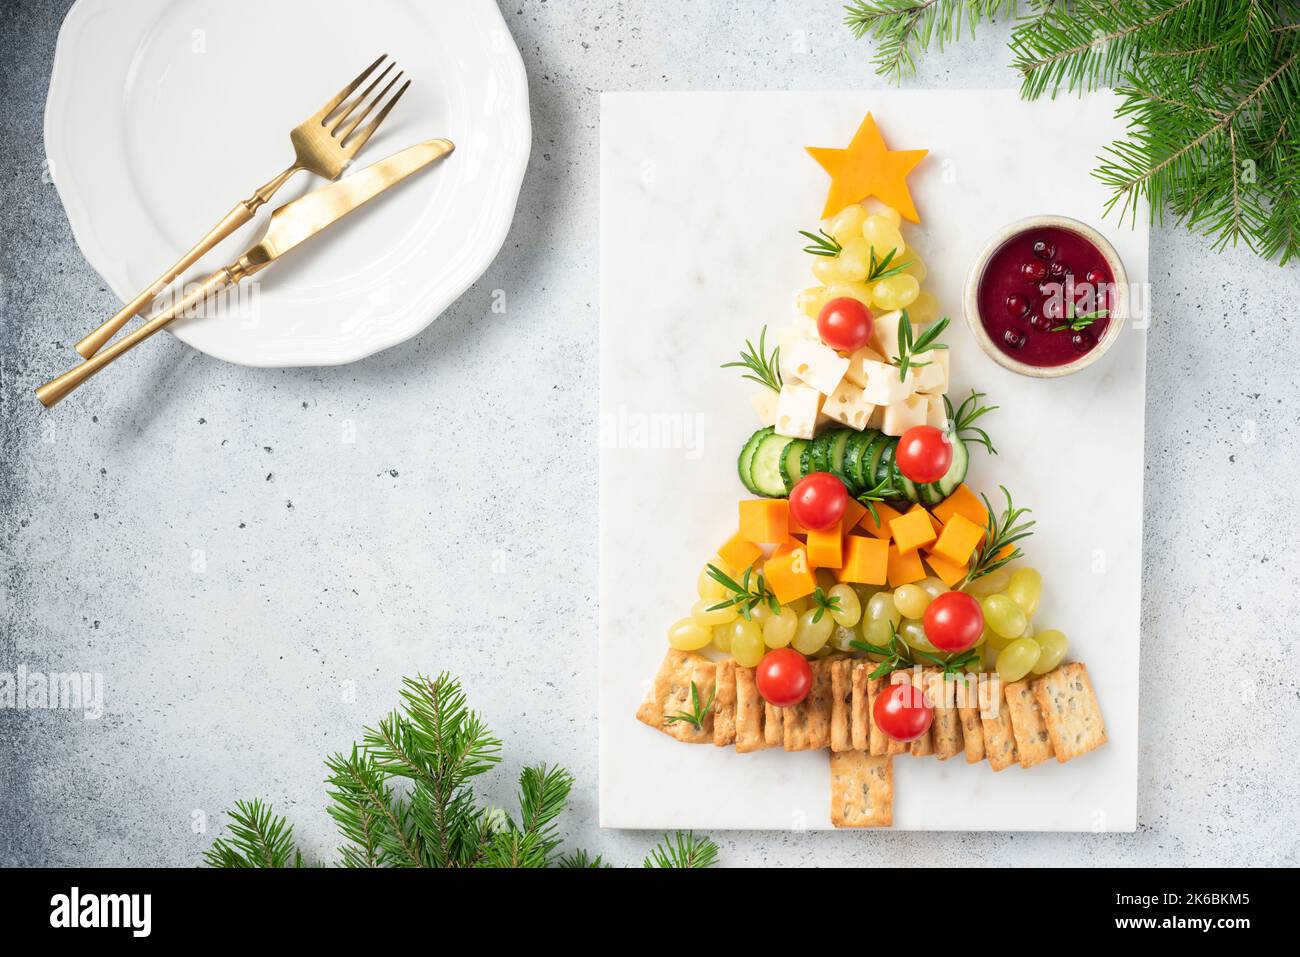 Christmas tree shaped Cheese Plate with crackers, grapes, cheese, tomatoes and cranberry sauce, winter holidays snack. Top view copy space Stock Photo